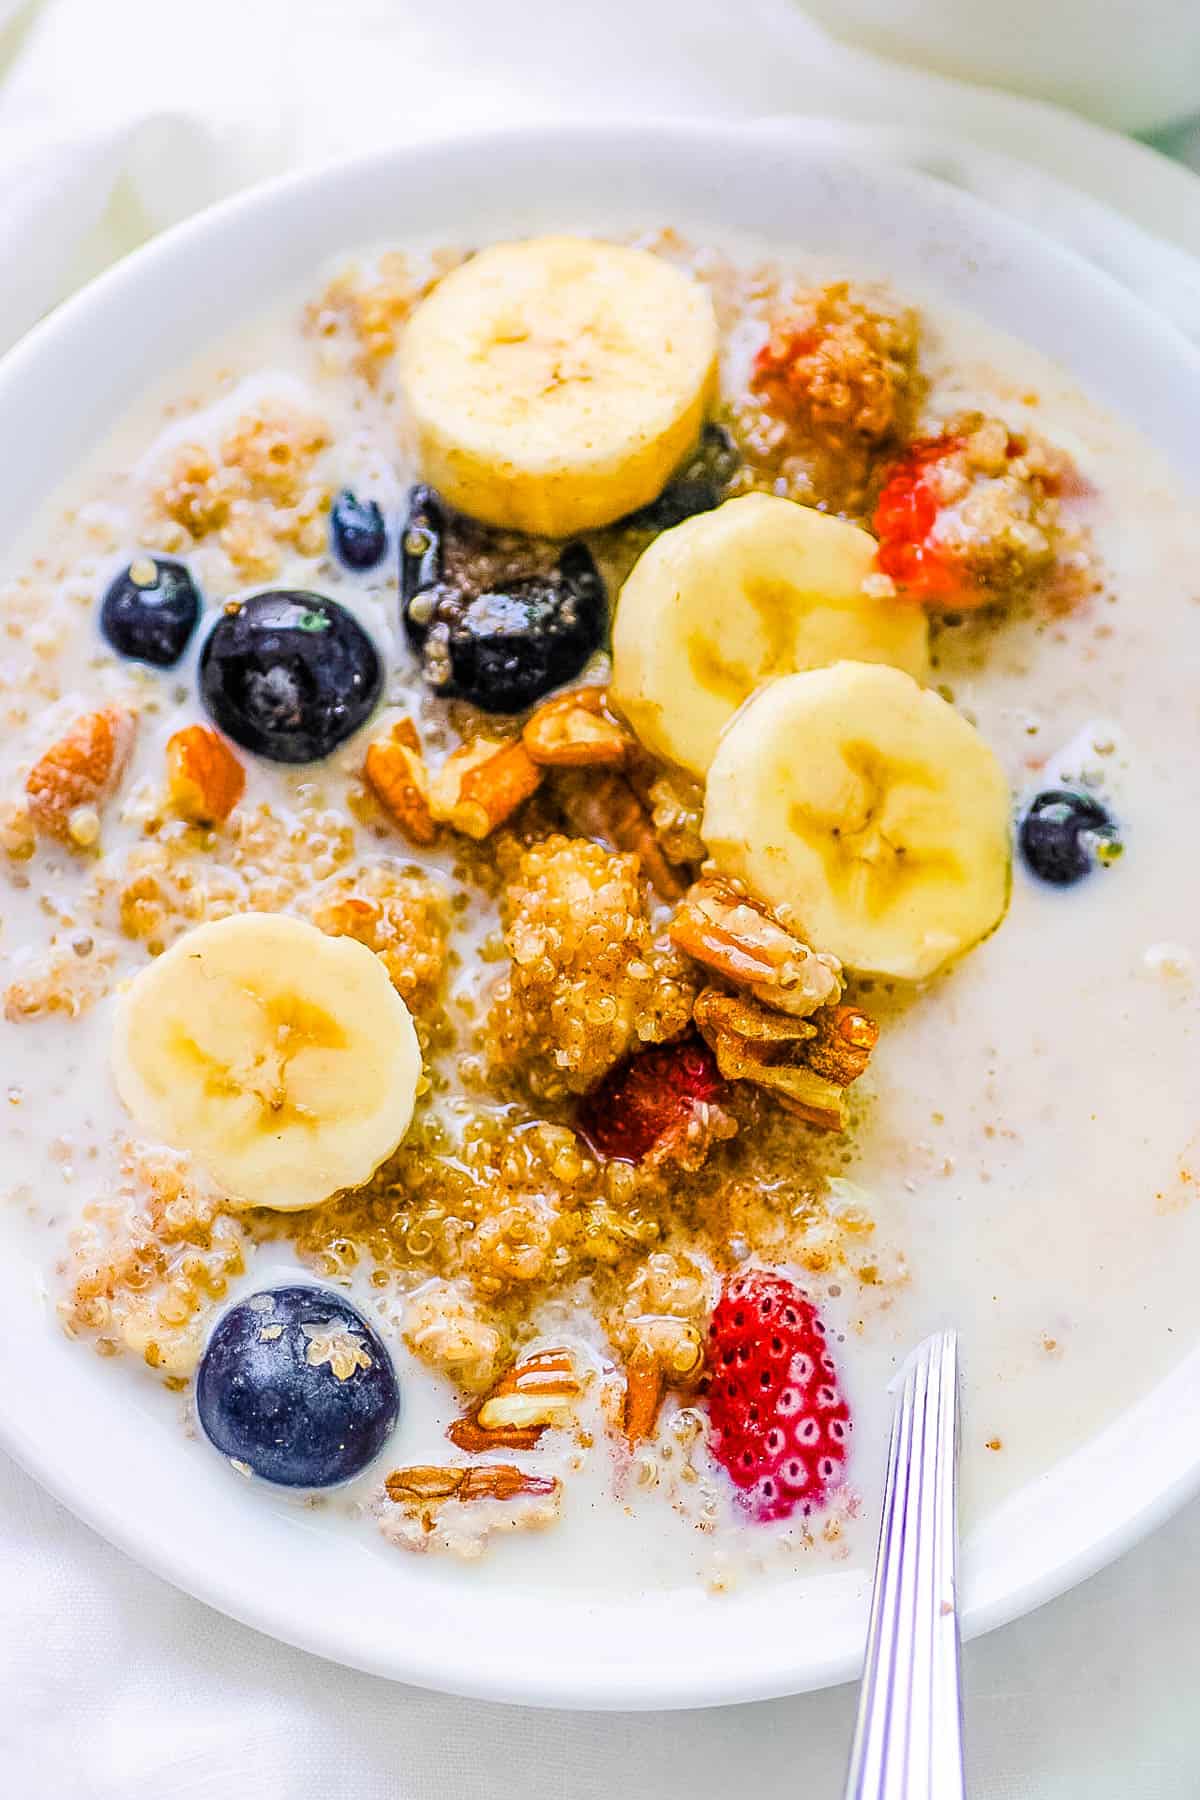 Quinoa oatmeal served with banana slices, nuts, milk and berries in a white bowl with a s،.